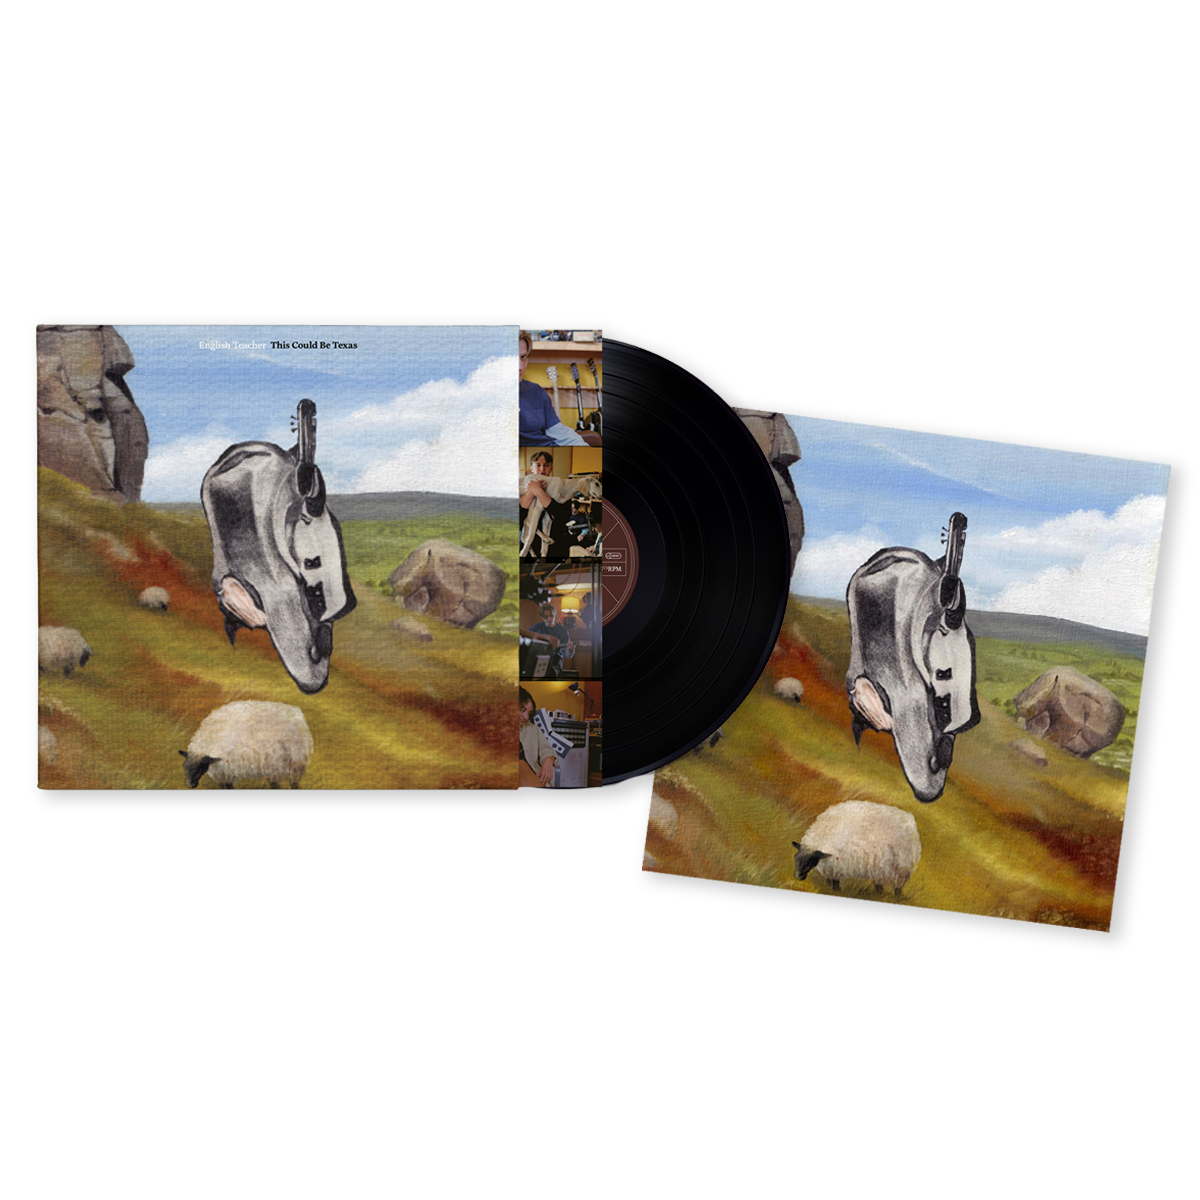 This Could be Texas: Vinyl LP + Exclusive Signed Art Card